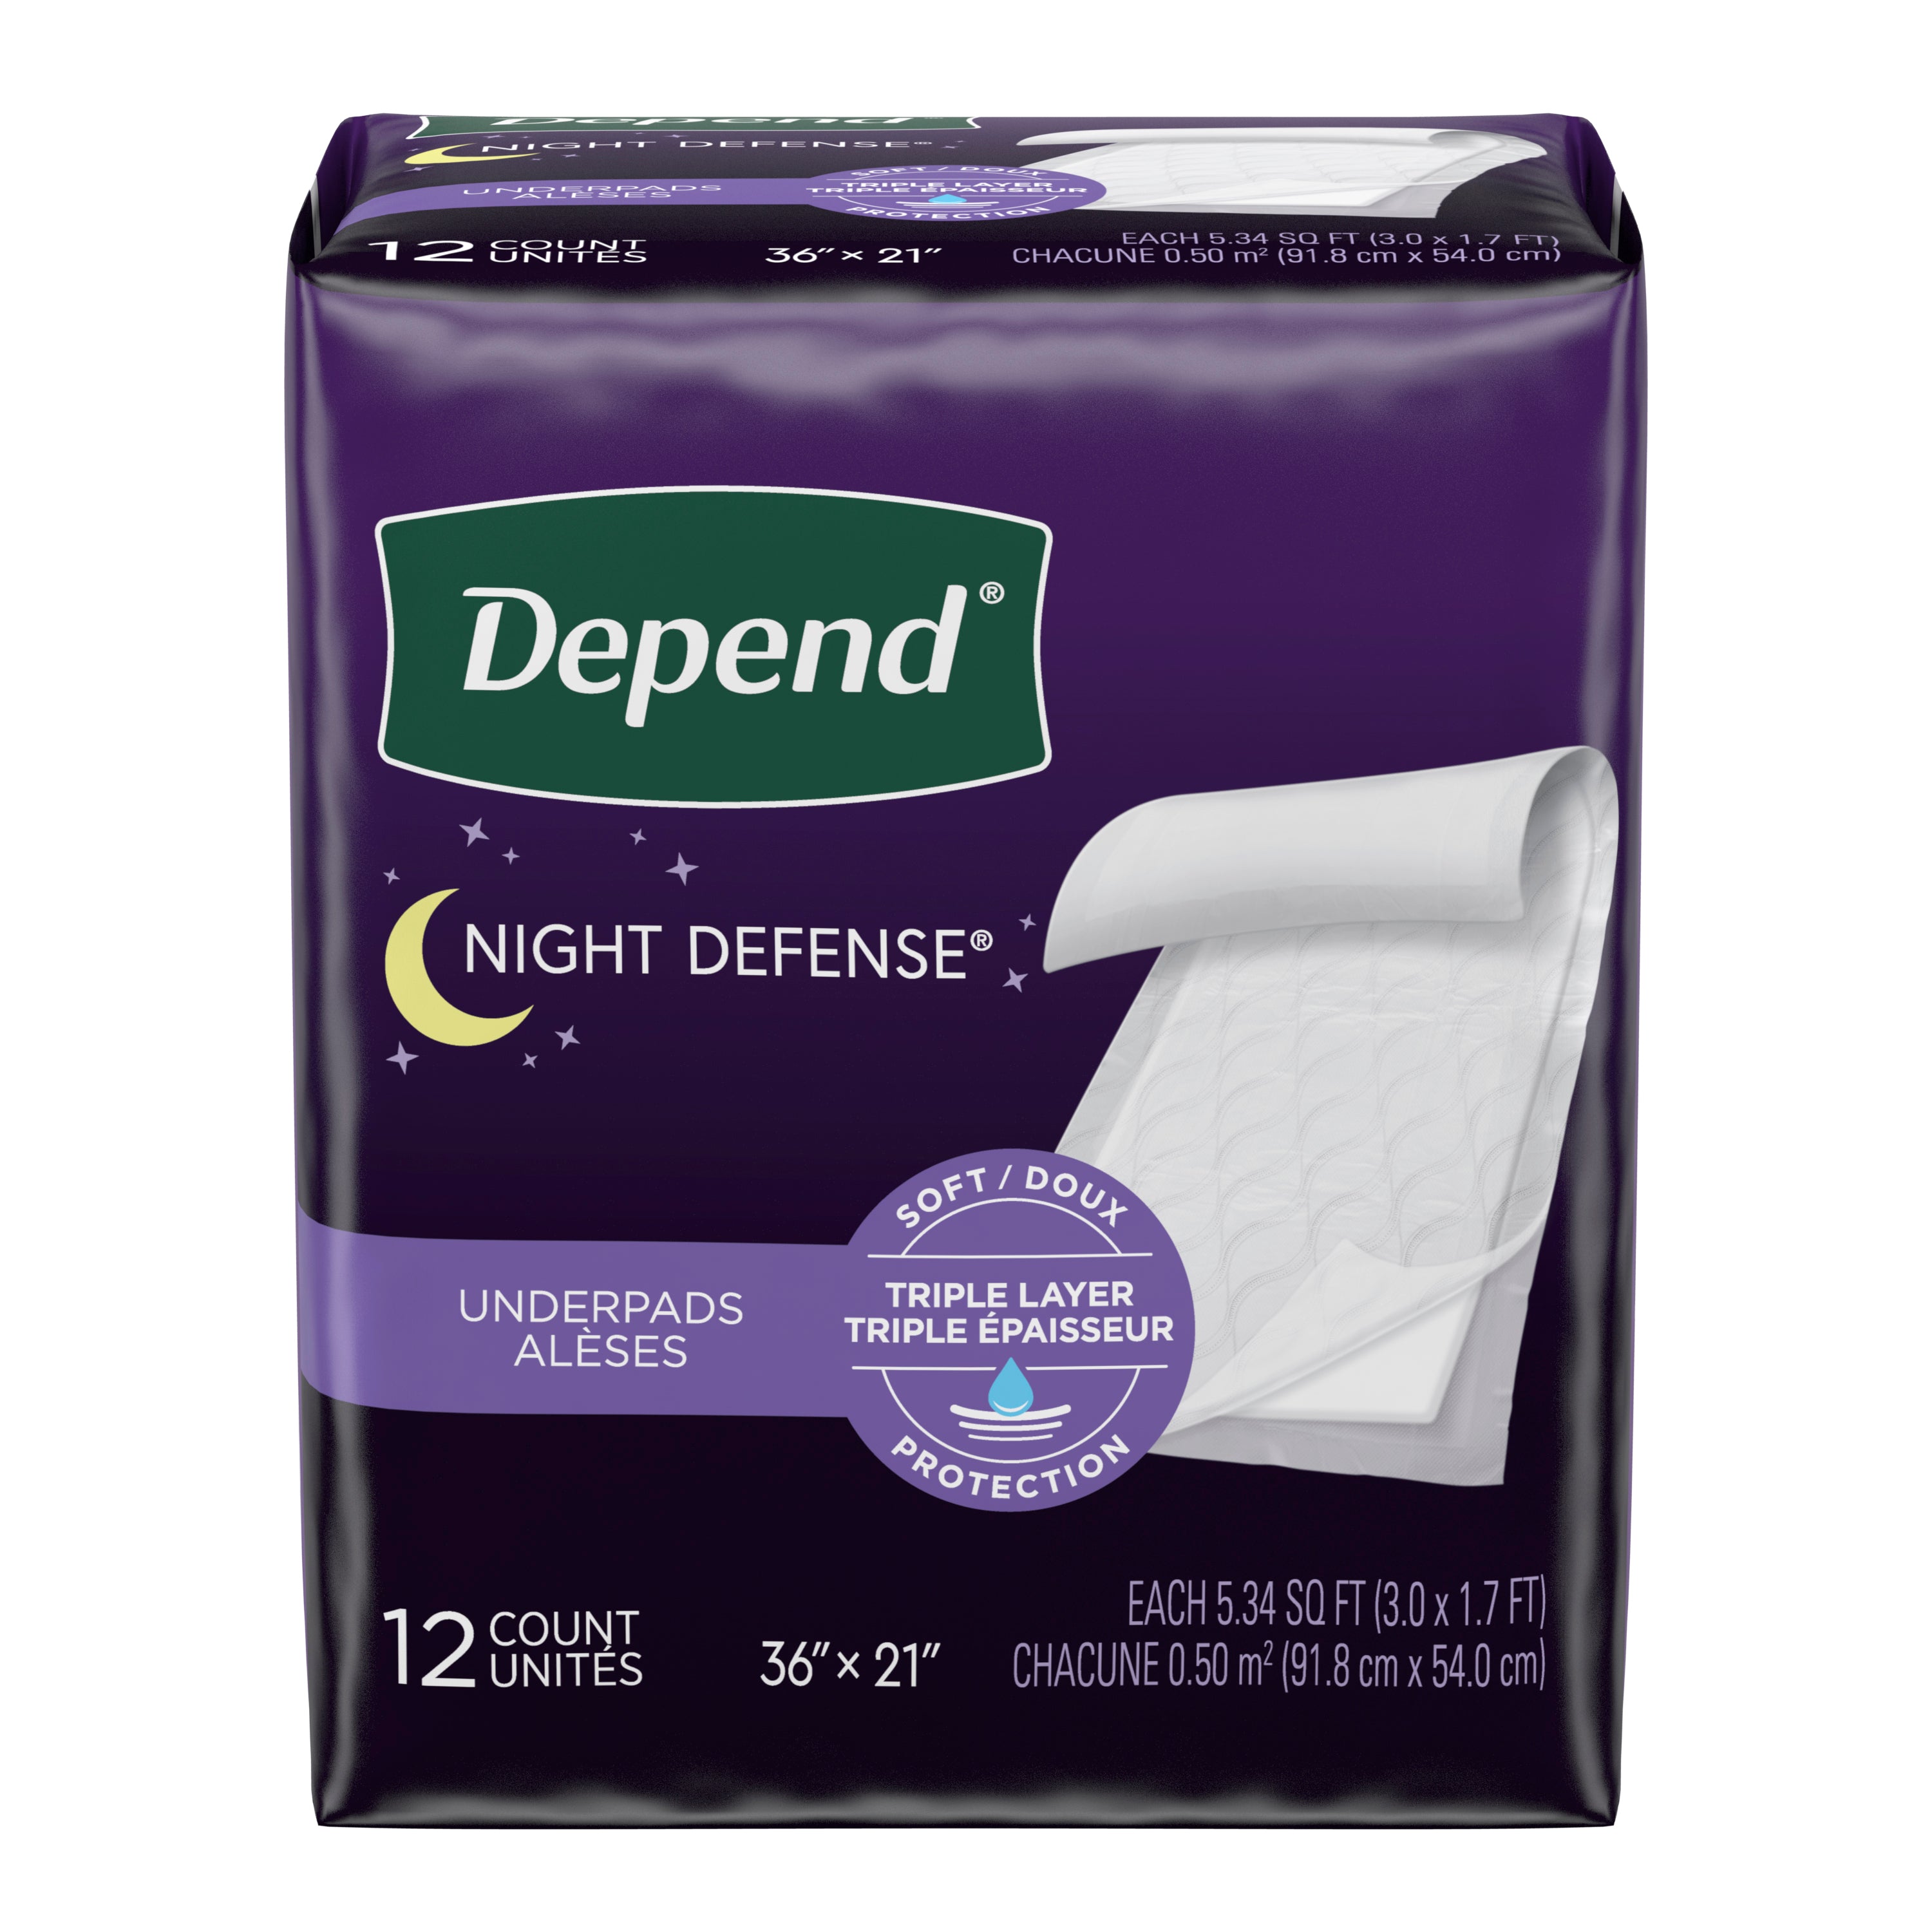 Depend Night Defense Underpads - Value Pack